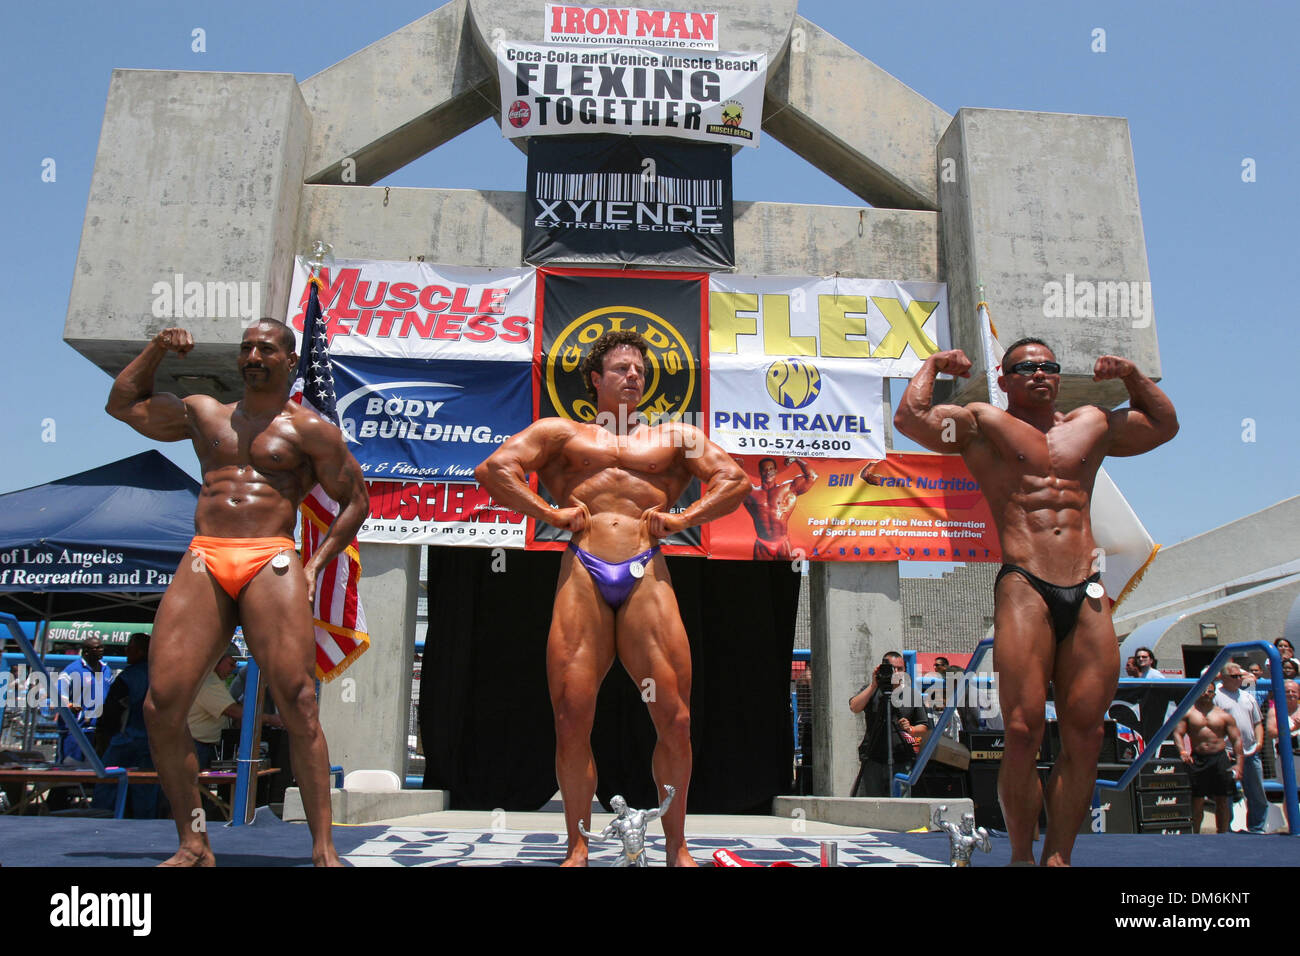 May 30, 2005; Venice, CA, USA; Contestants take part in the two-day 'Gold's Muscle Beach Venice Bodybuilding and Figure Classic' featuring male and female bodybuilders from around the world. The annual Memorial Day event also paid tribute to the armed forces and celebrated the 40th anniversary of Gold's Gym. Mandatory Credit: Photo by Lori Conn/ZUMA Press. (©) Copyright 2005 by Lor Stock Photo